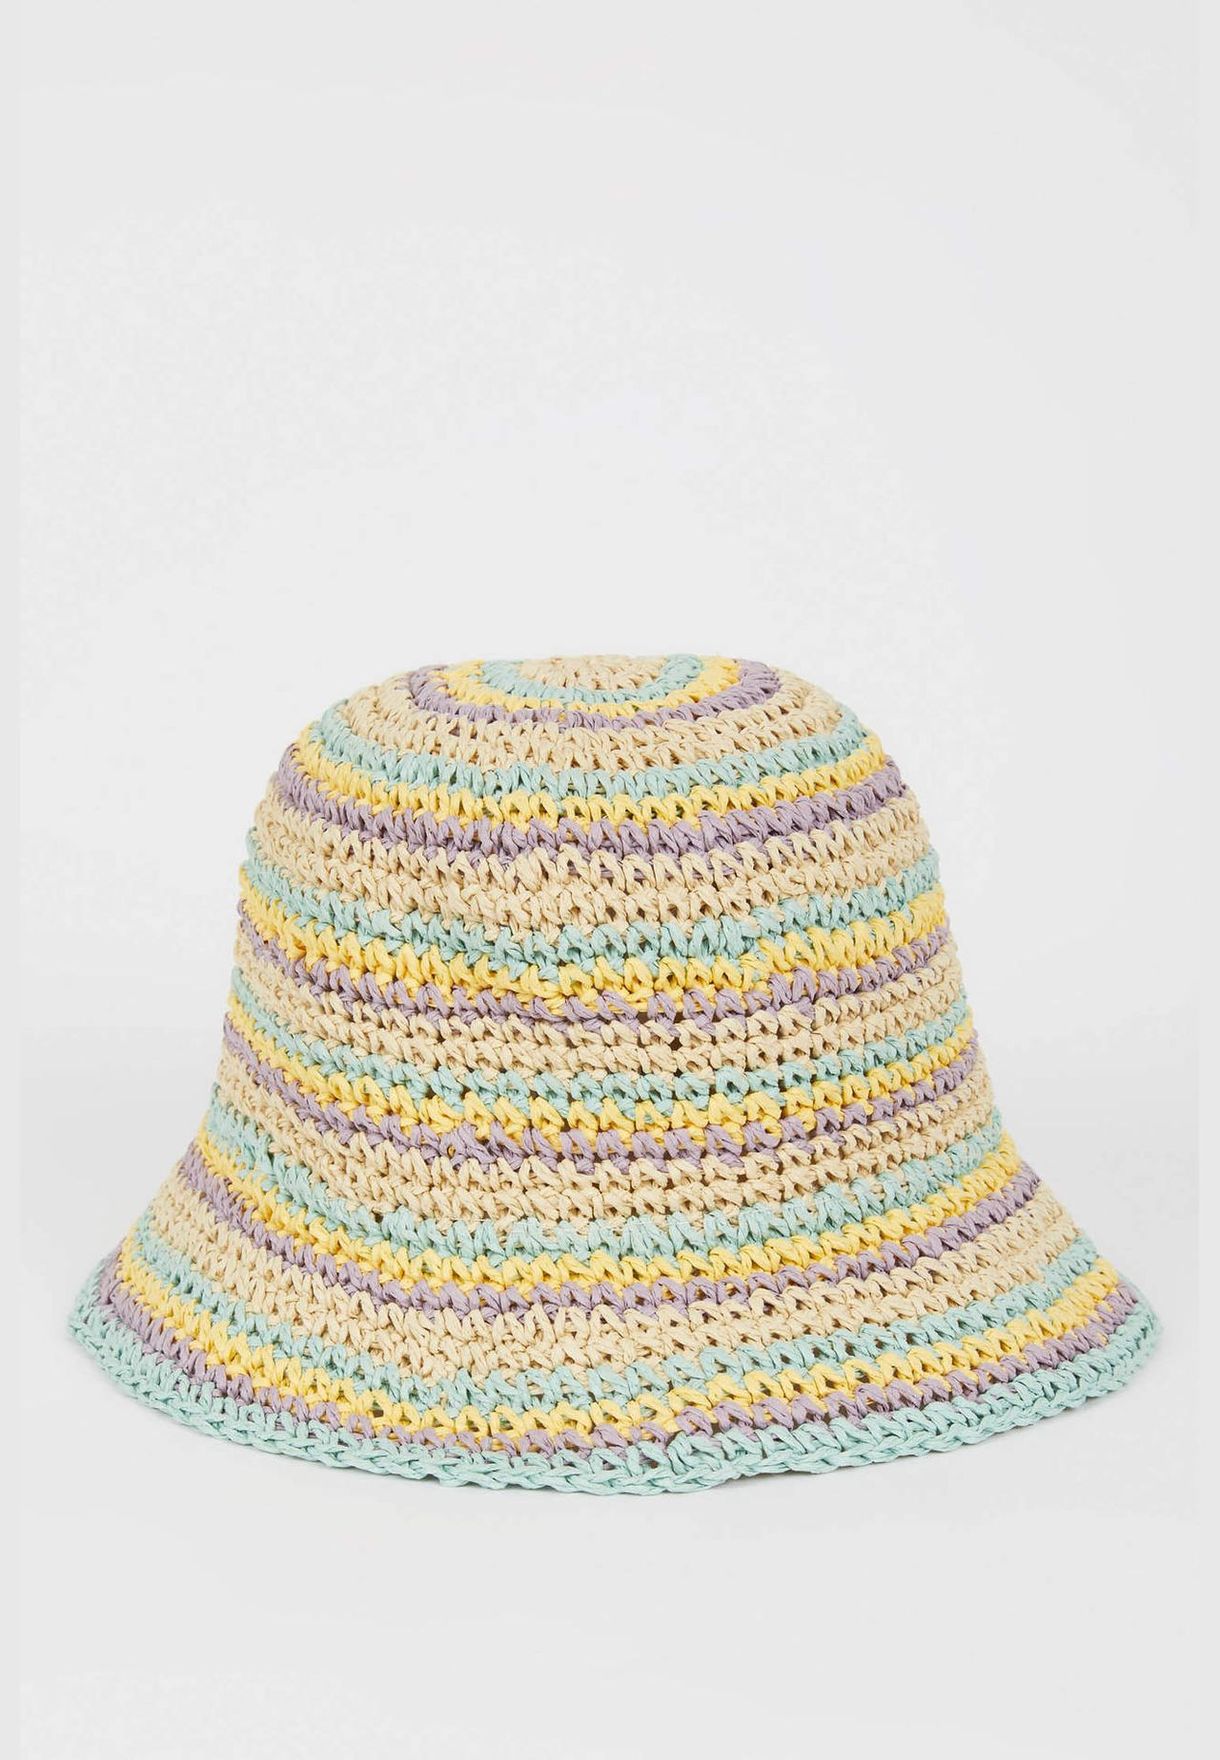 Girls Colorful Straw Hats